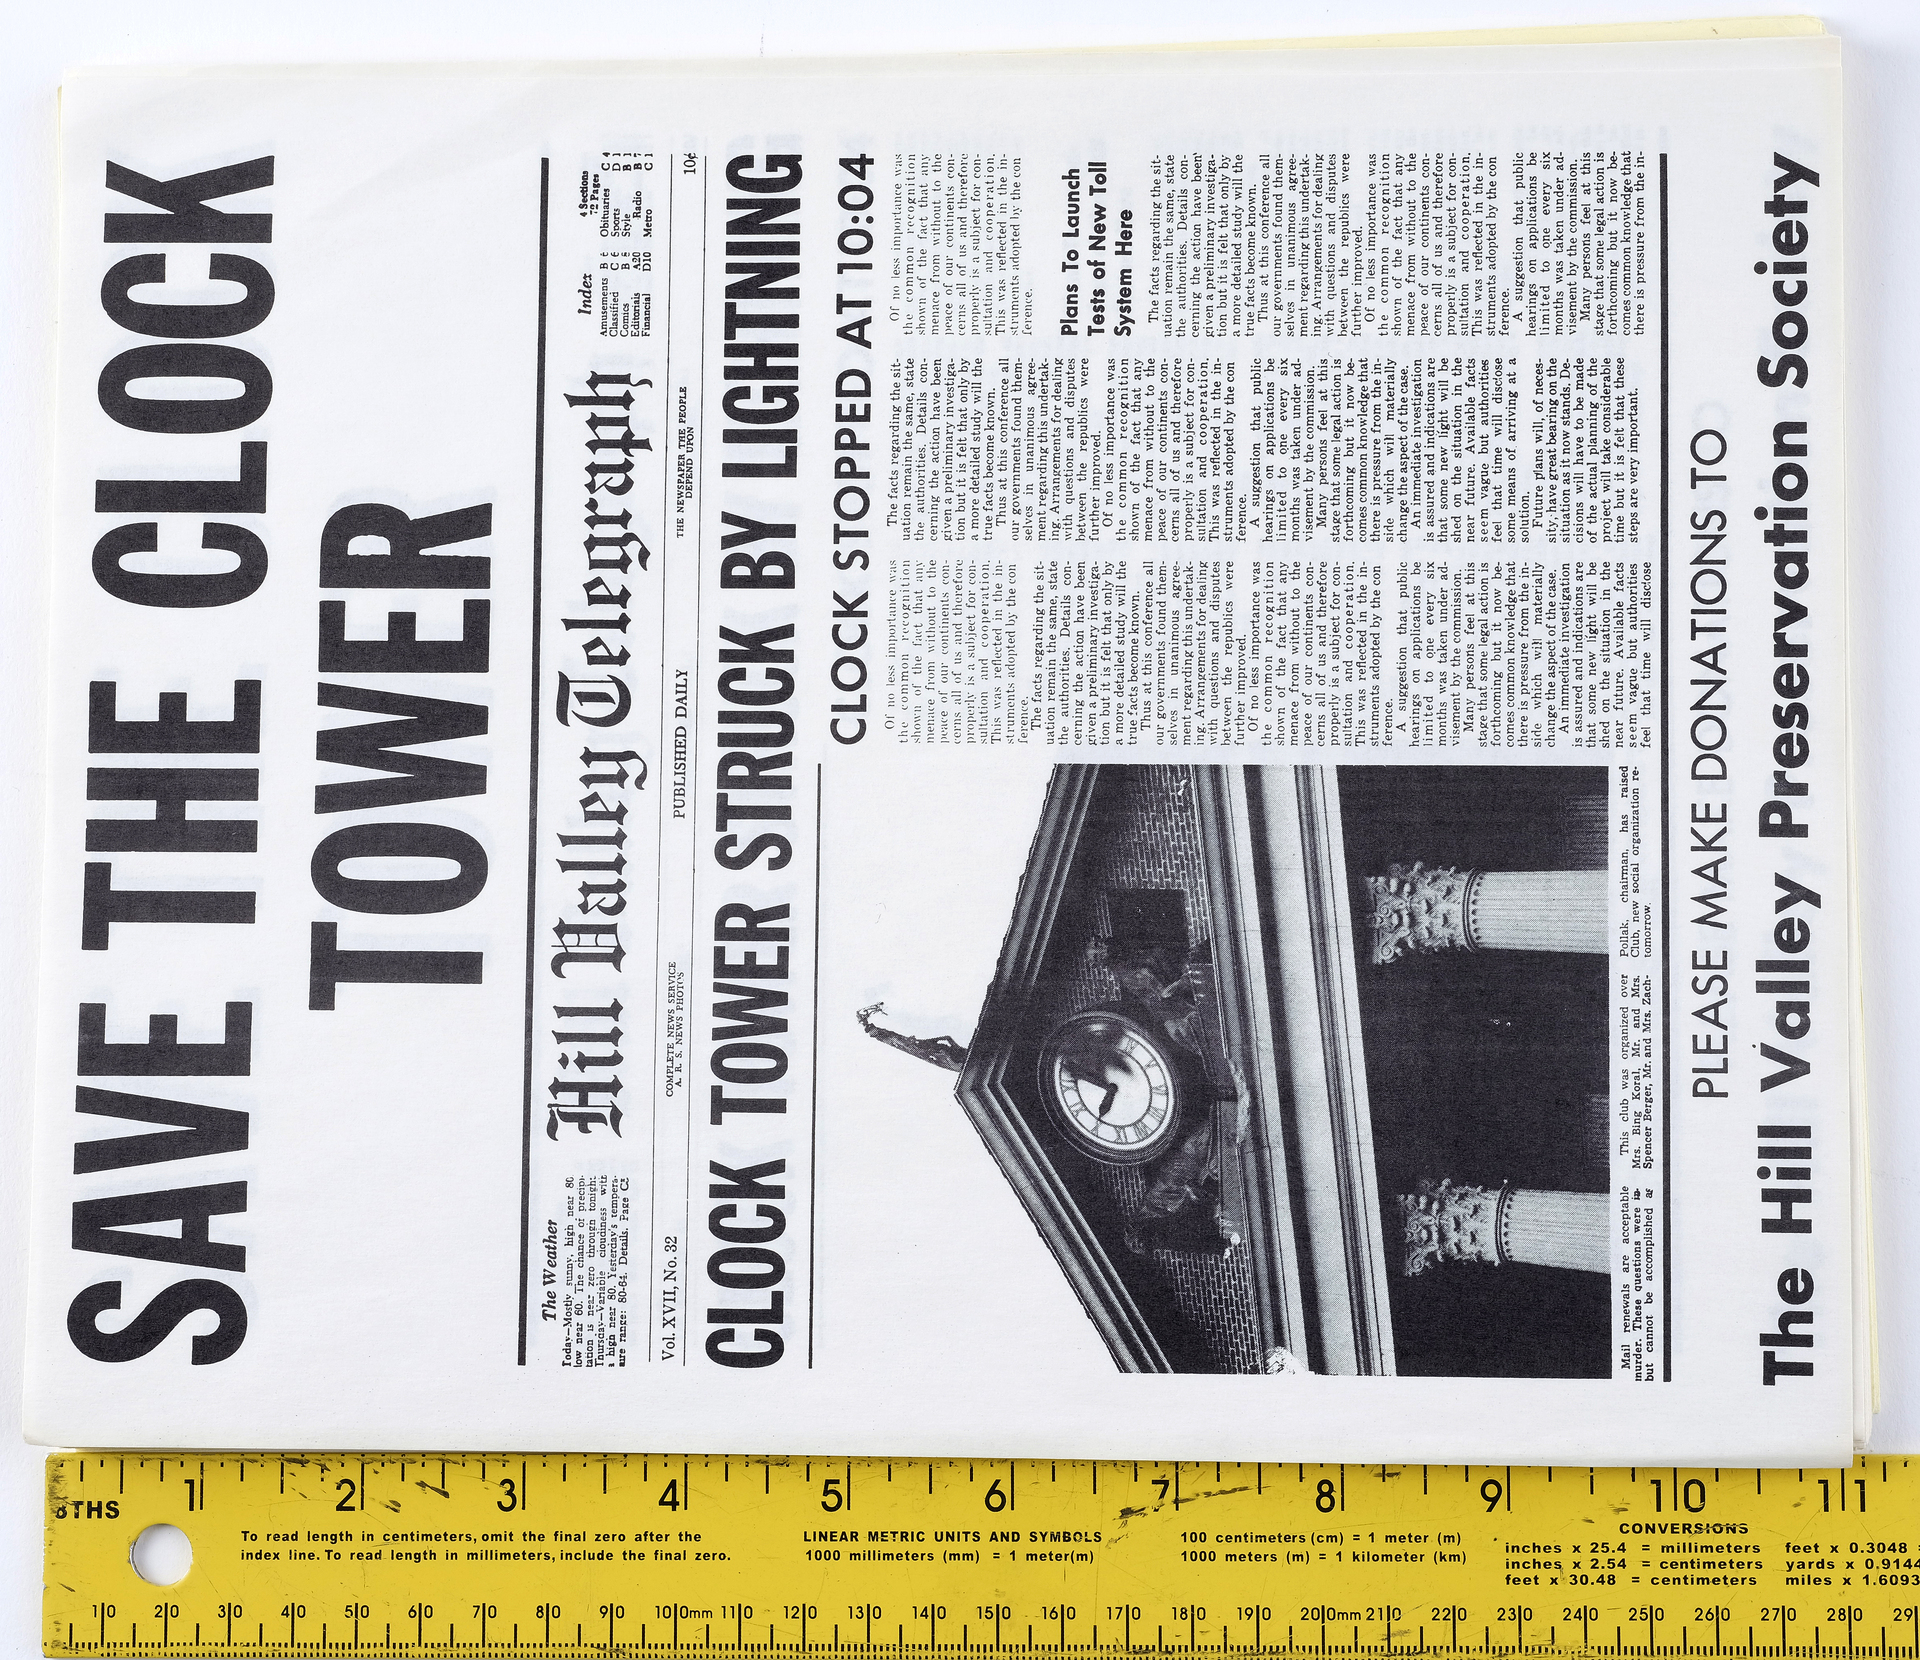 BACK TO THE FUTURE (1985) - Pair of Yellow and White "Save The Clock Tower" Flyers - Image 4 of 6